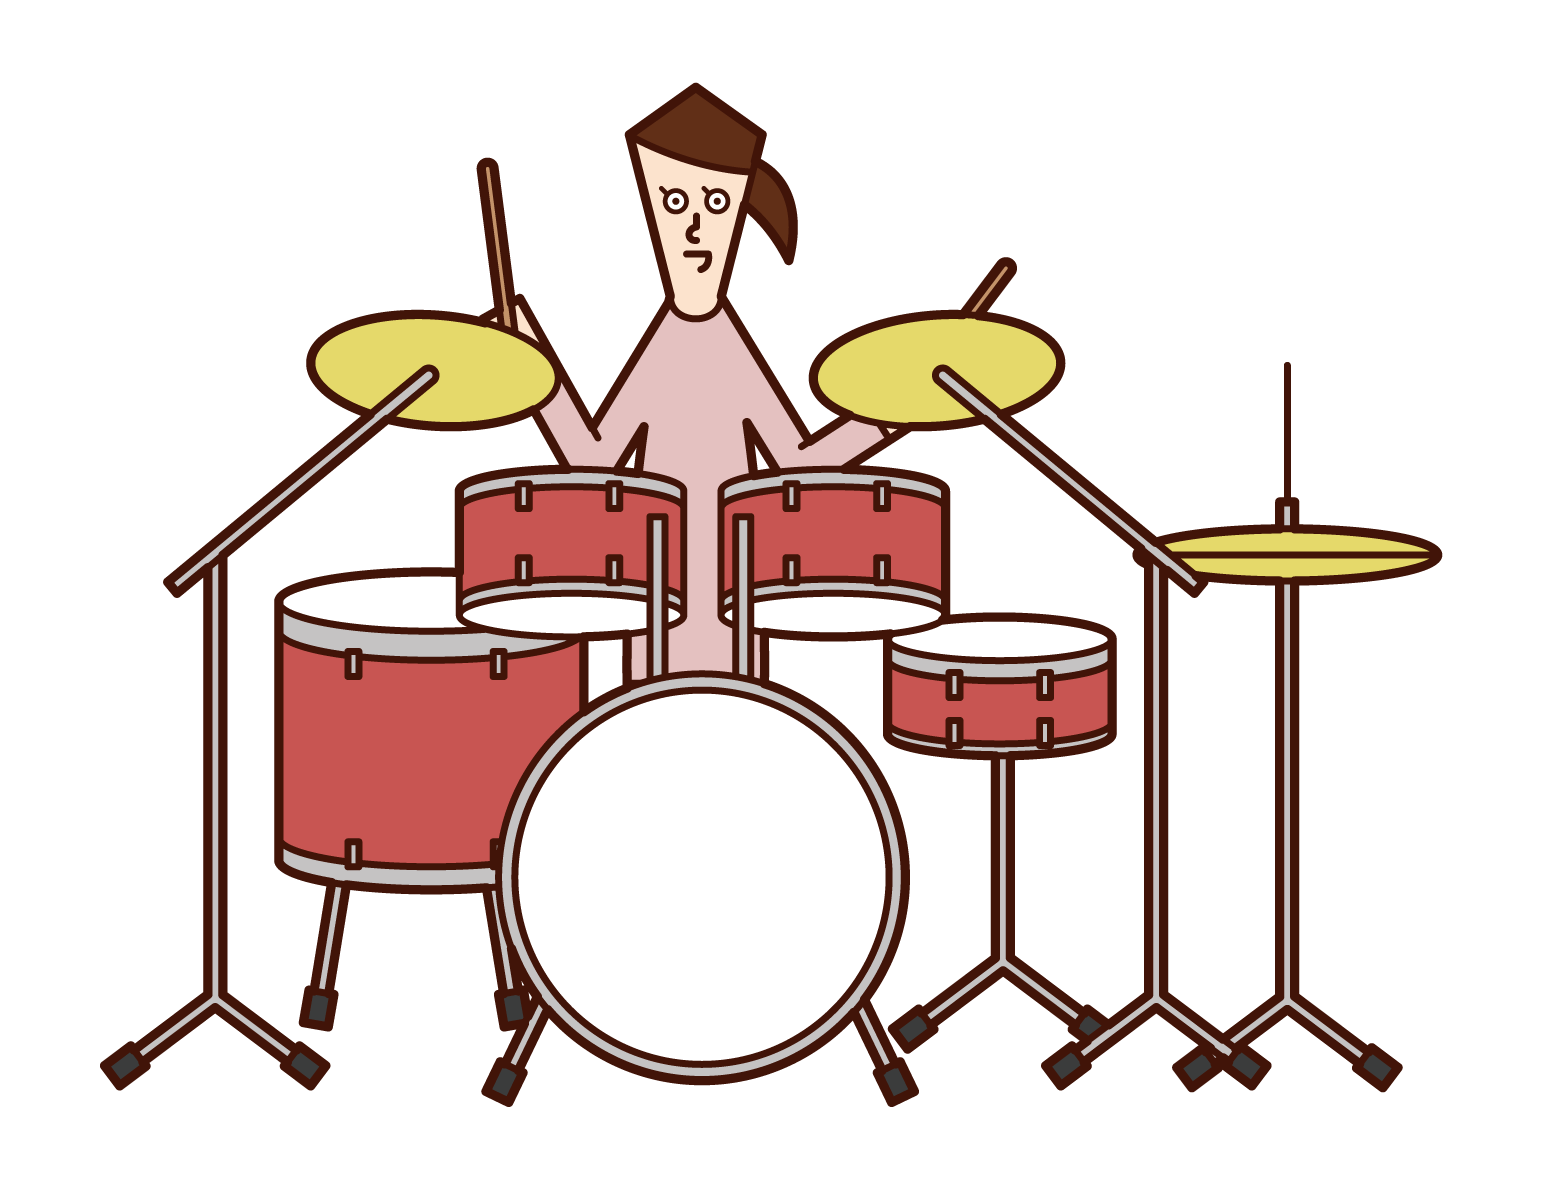 Illustration of a woman playing drums